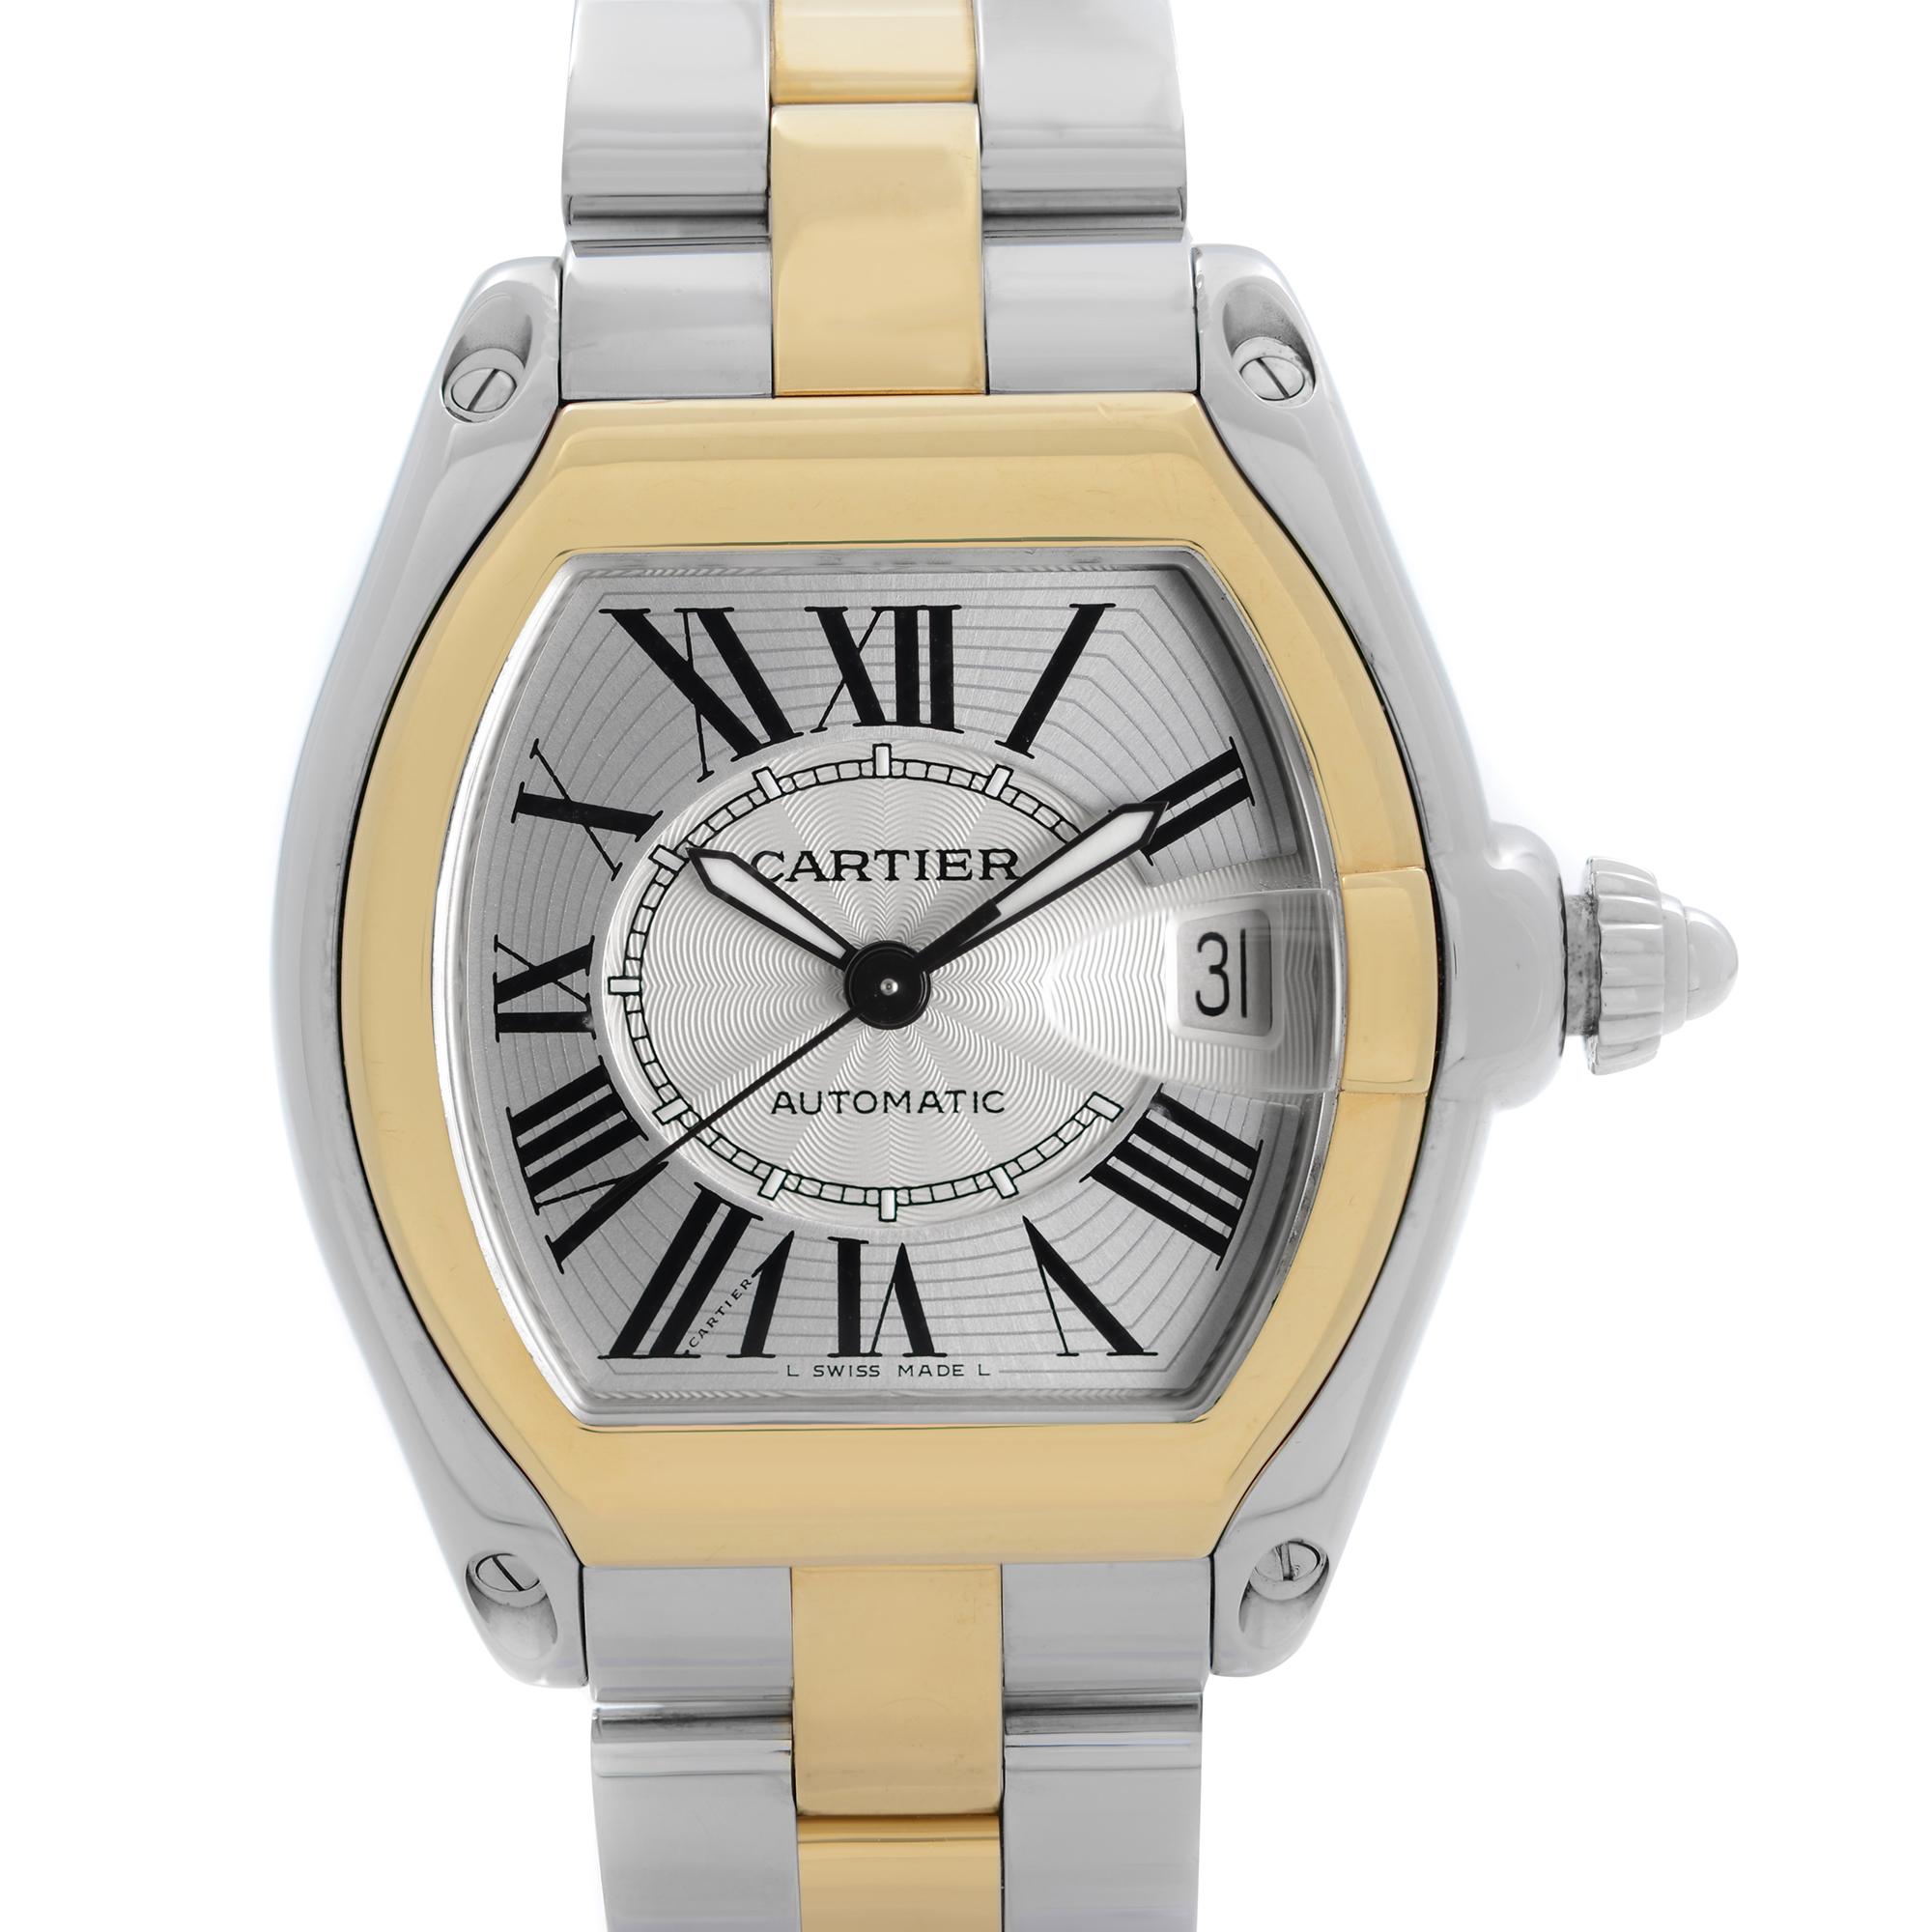 Pre-Owned Cartier Roadster 37mm Stainless Steel 18k Yellow Gold Silver Dial Men's Automatic Watch W62031Y4. The Watch is powered by an Automatic Movement. This Beautiful Timepiece Features: Polished Stainless Steel Case and Steel with 18k Yellow